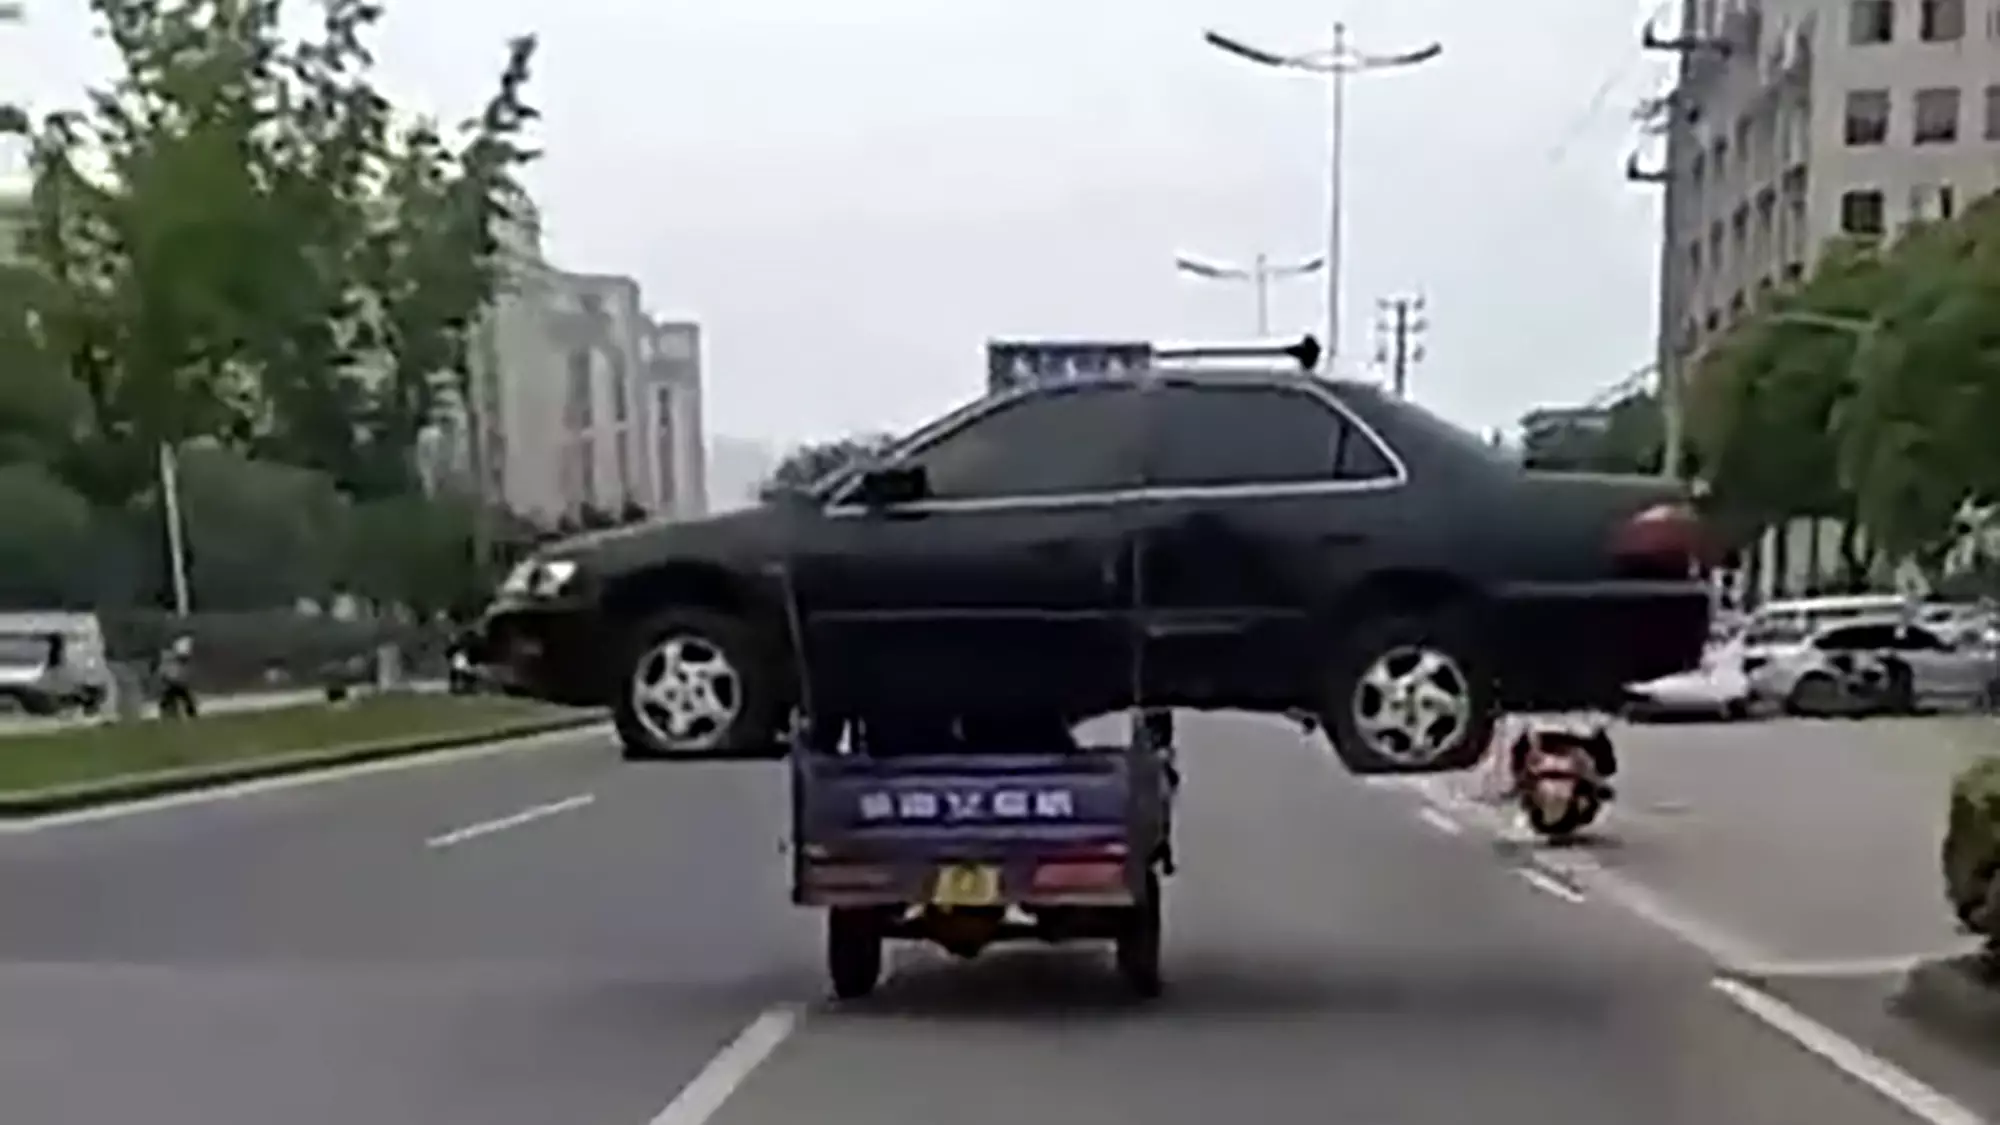 Bizarre Footage Shows Pedicab Carrying Saloon Car Along Busy Road 